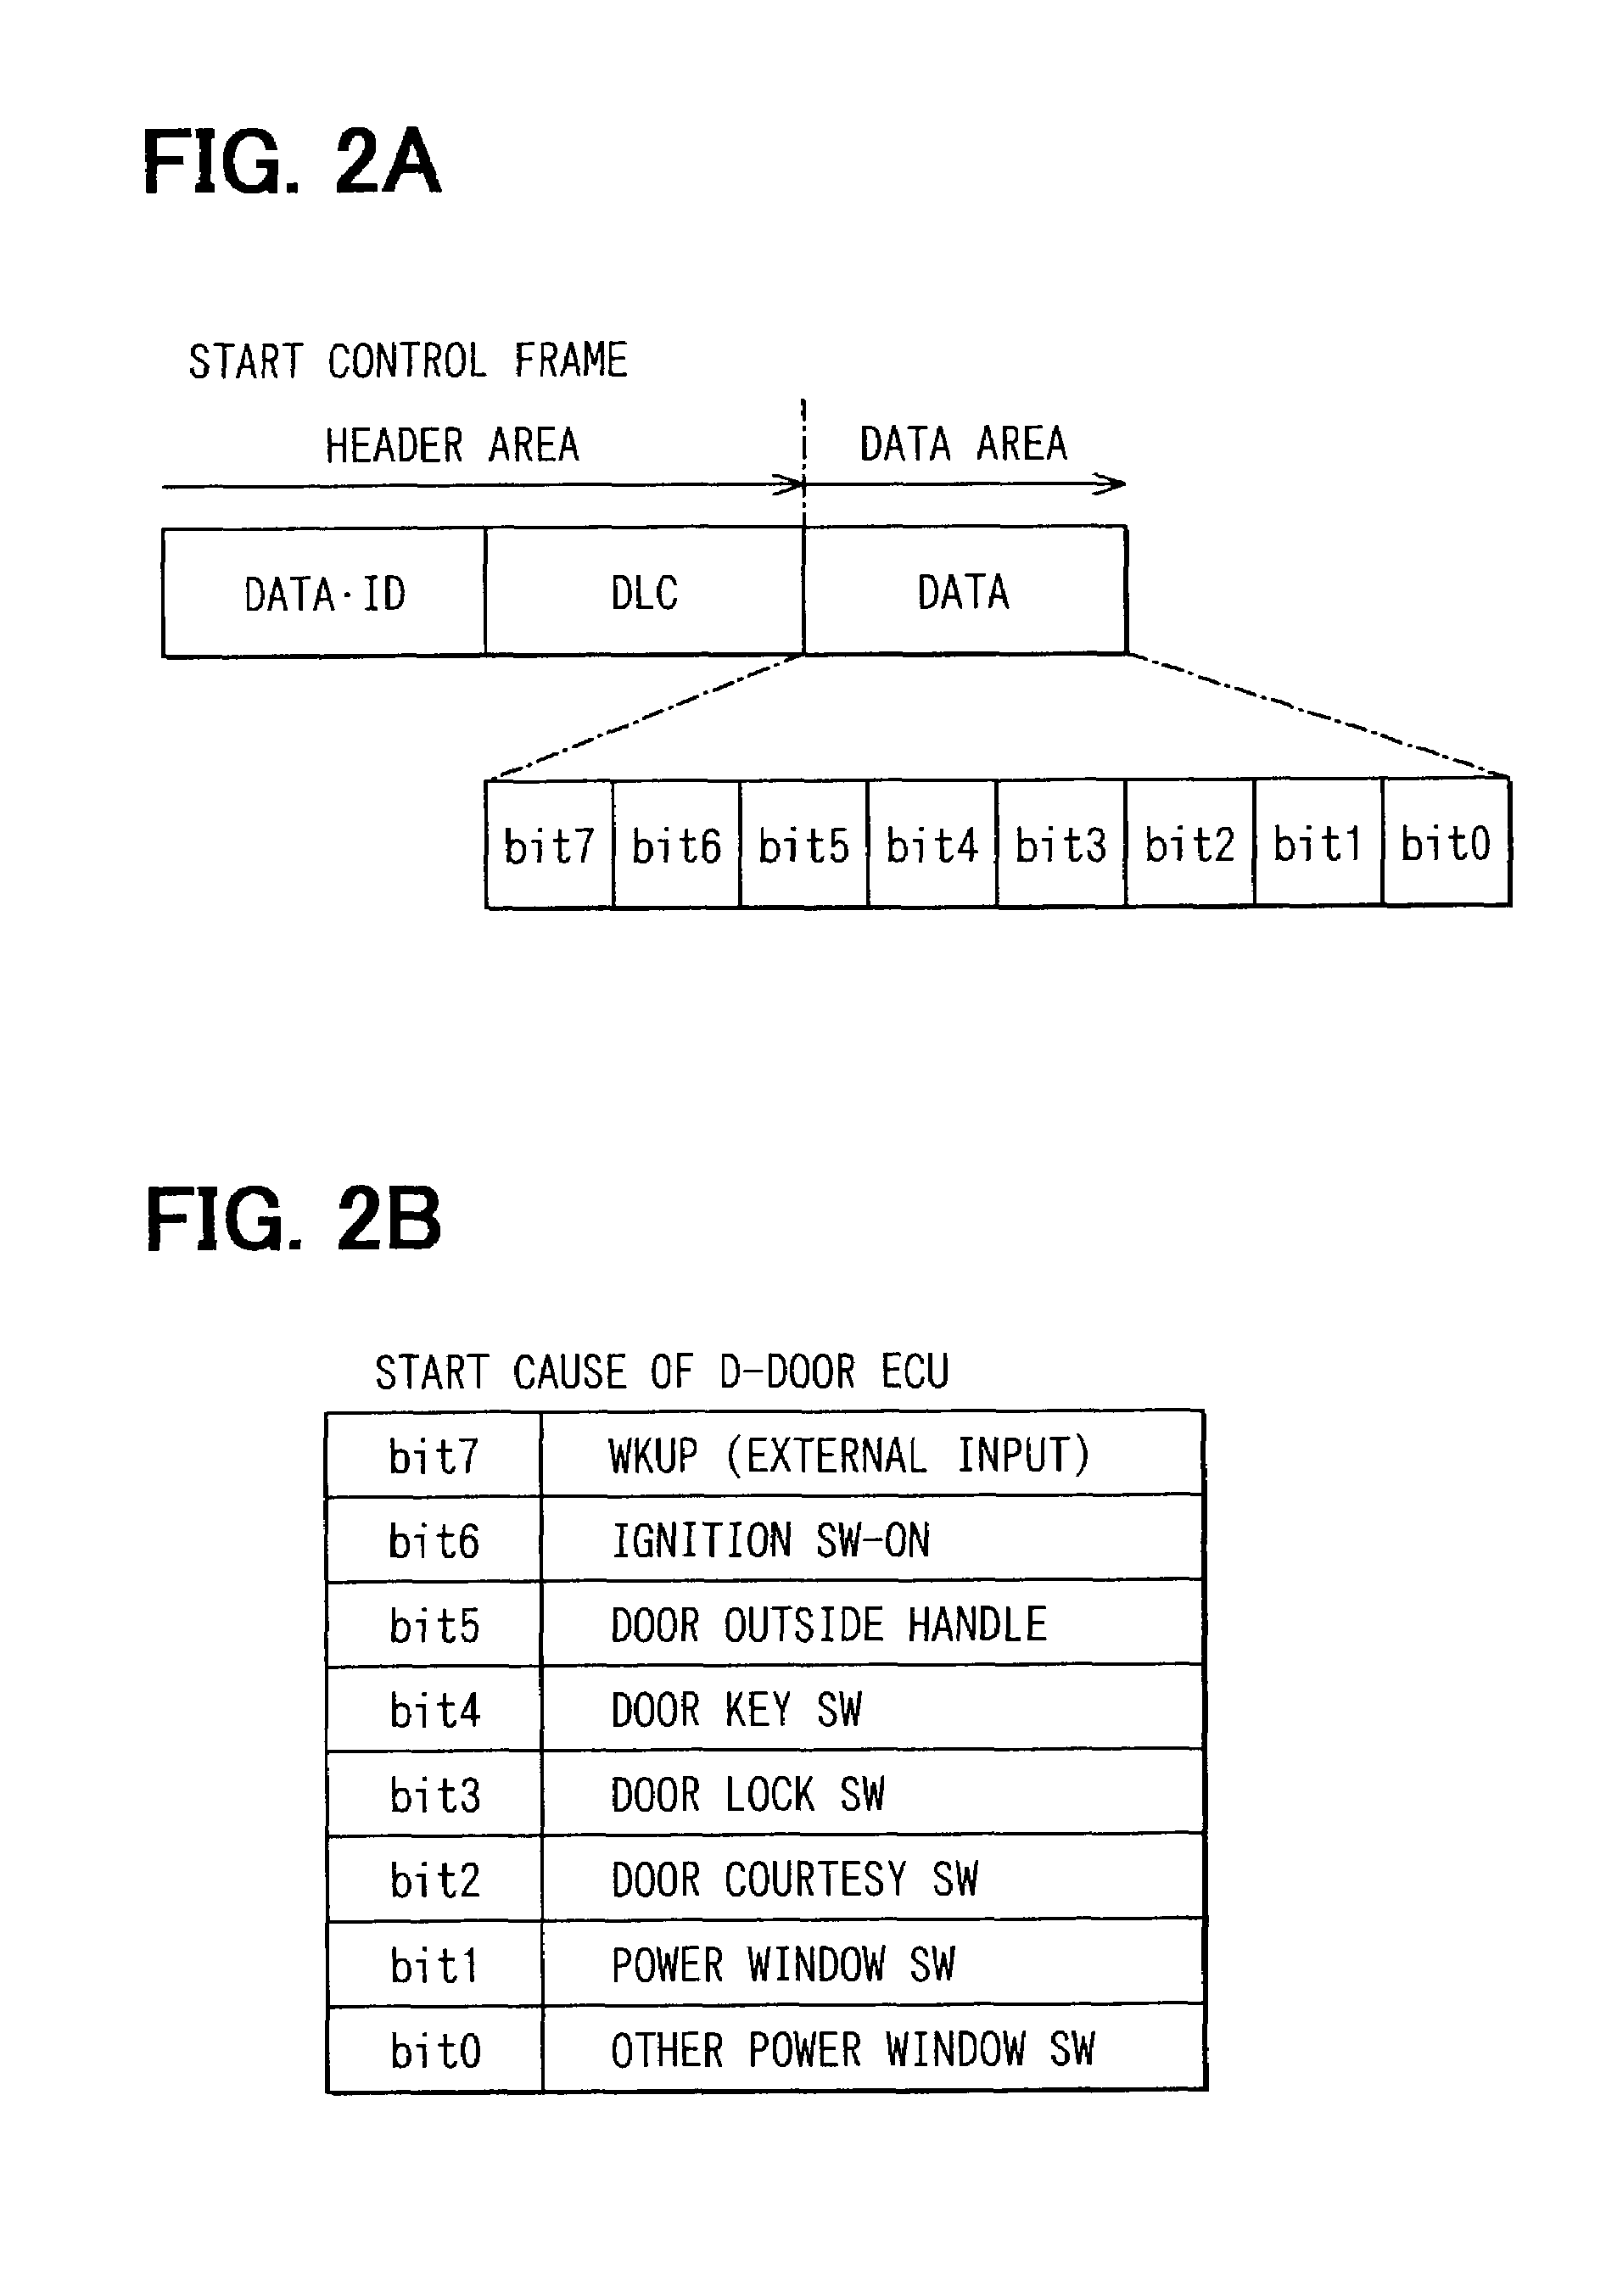 Network system using management frames for supervising control units